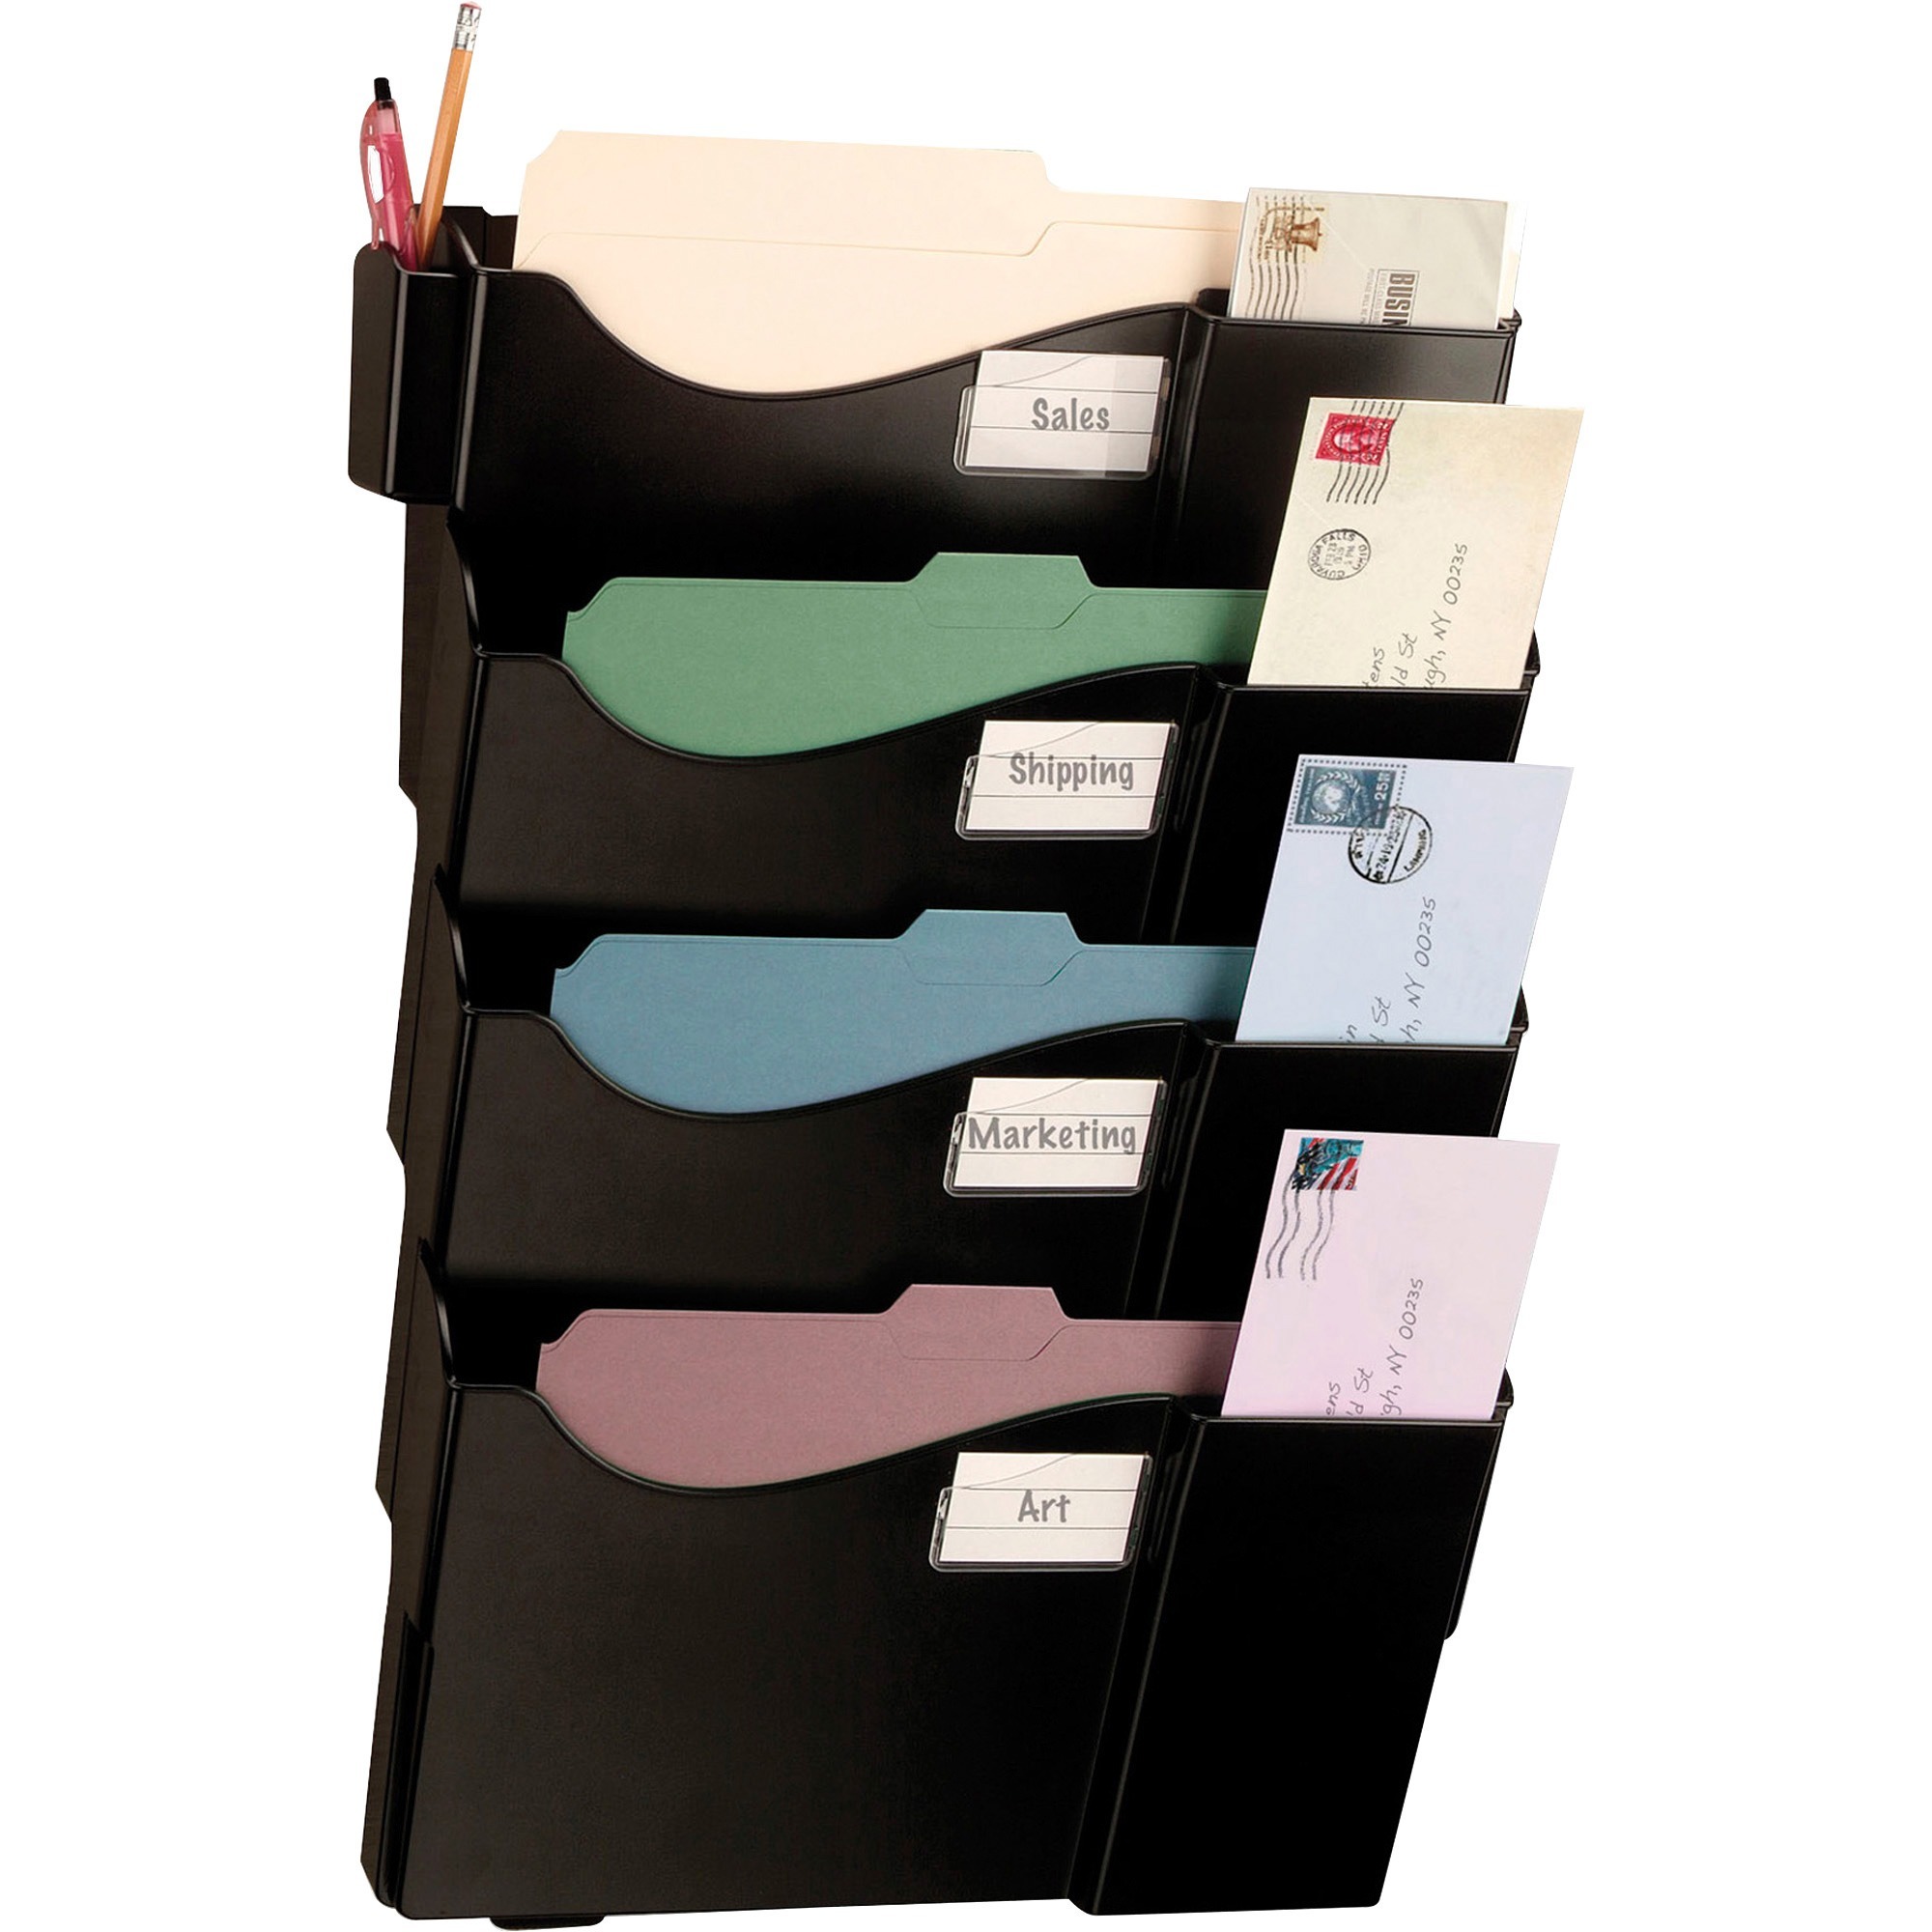 Officemate Grande Central Wall Filing System - 4 Pocket(s) - 23.5" Height x 16.6" Width x 4.8" Depth - Black - 1 / Pack